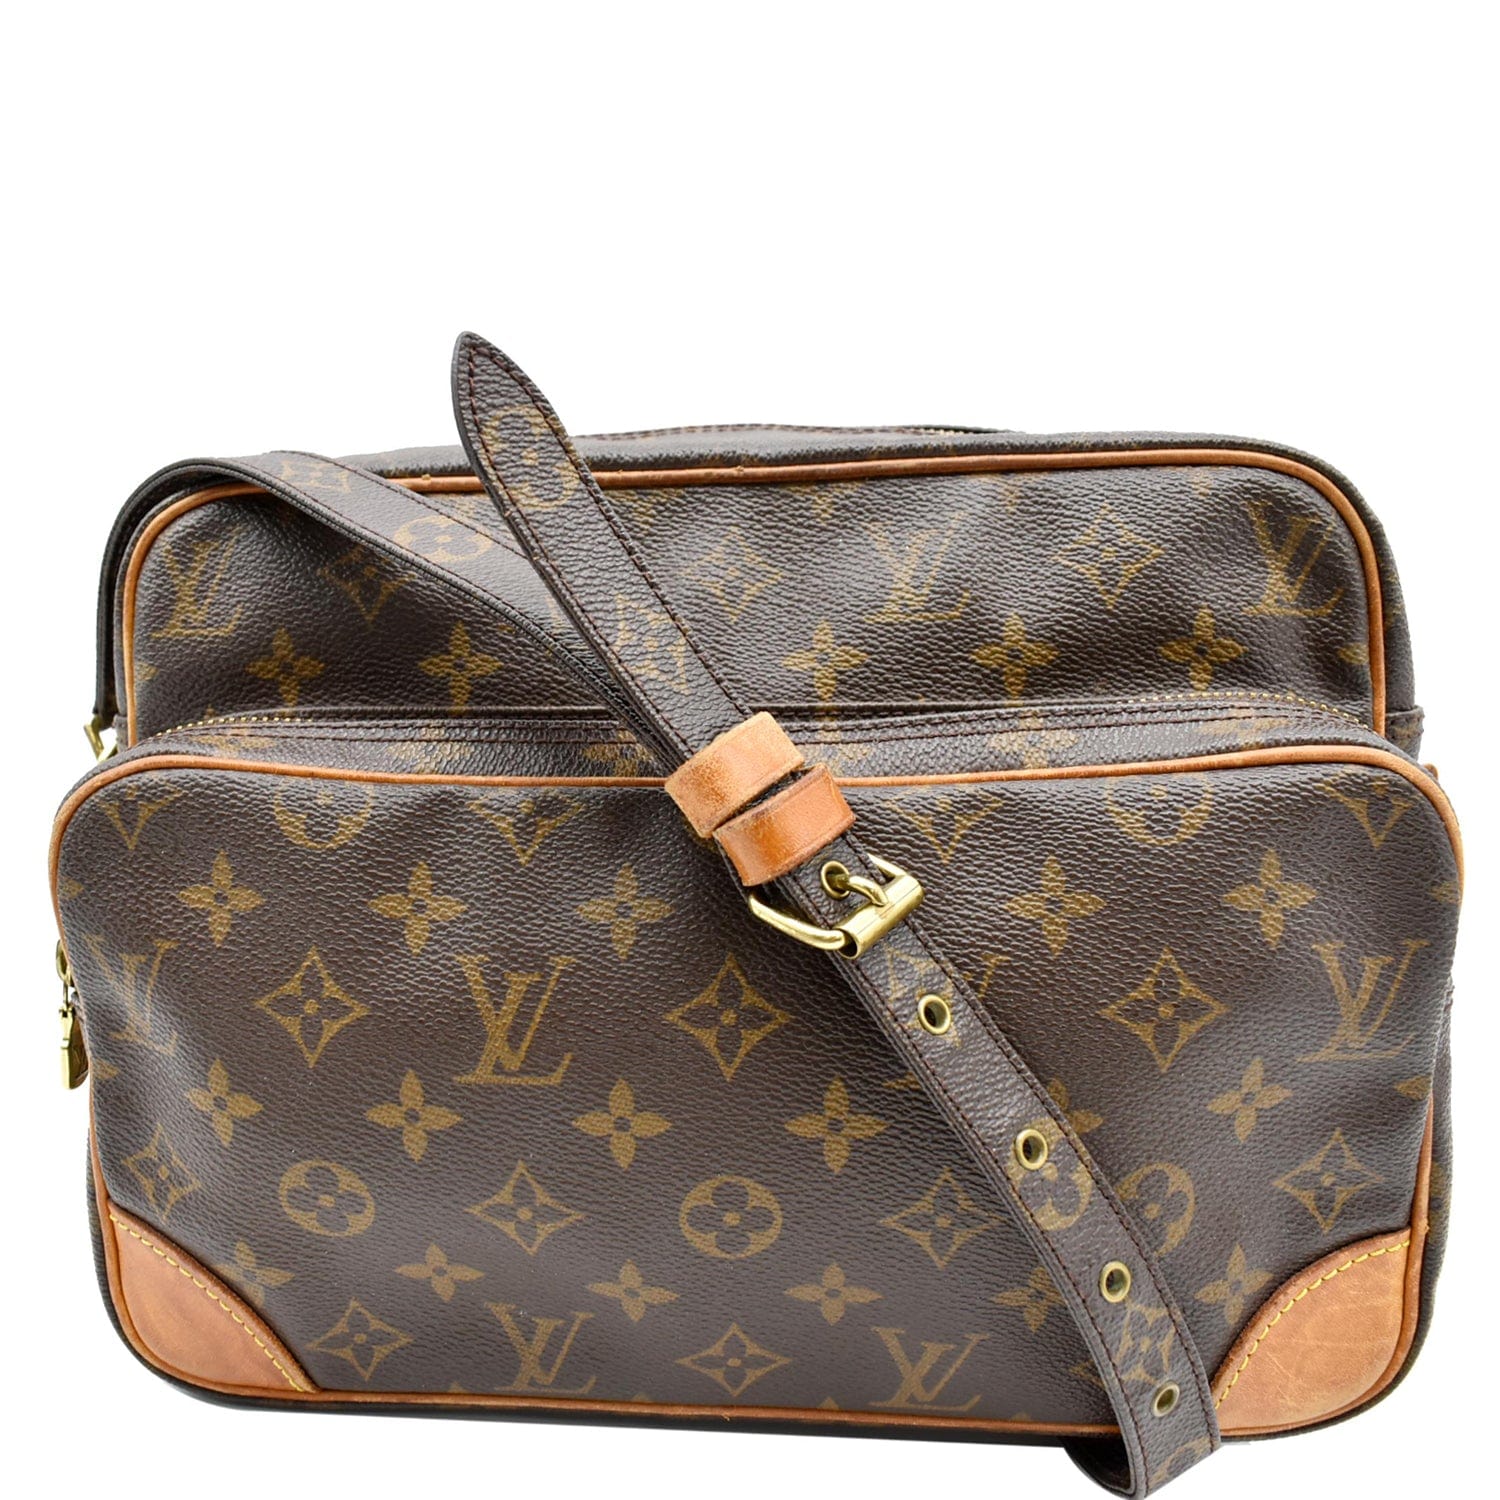 LOUIS VUITTON. Nile bag called of photographer in coated…